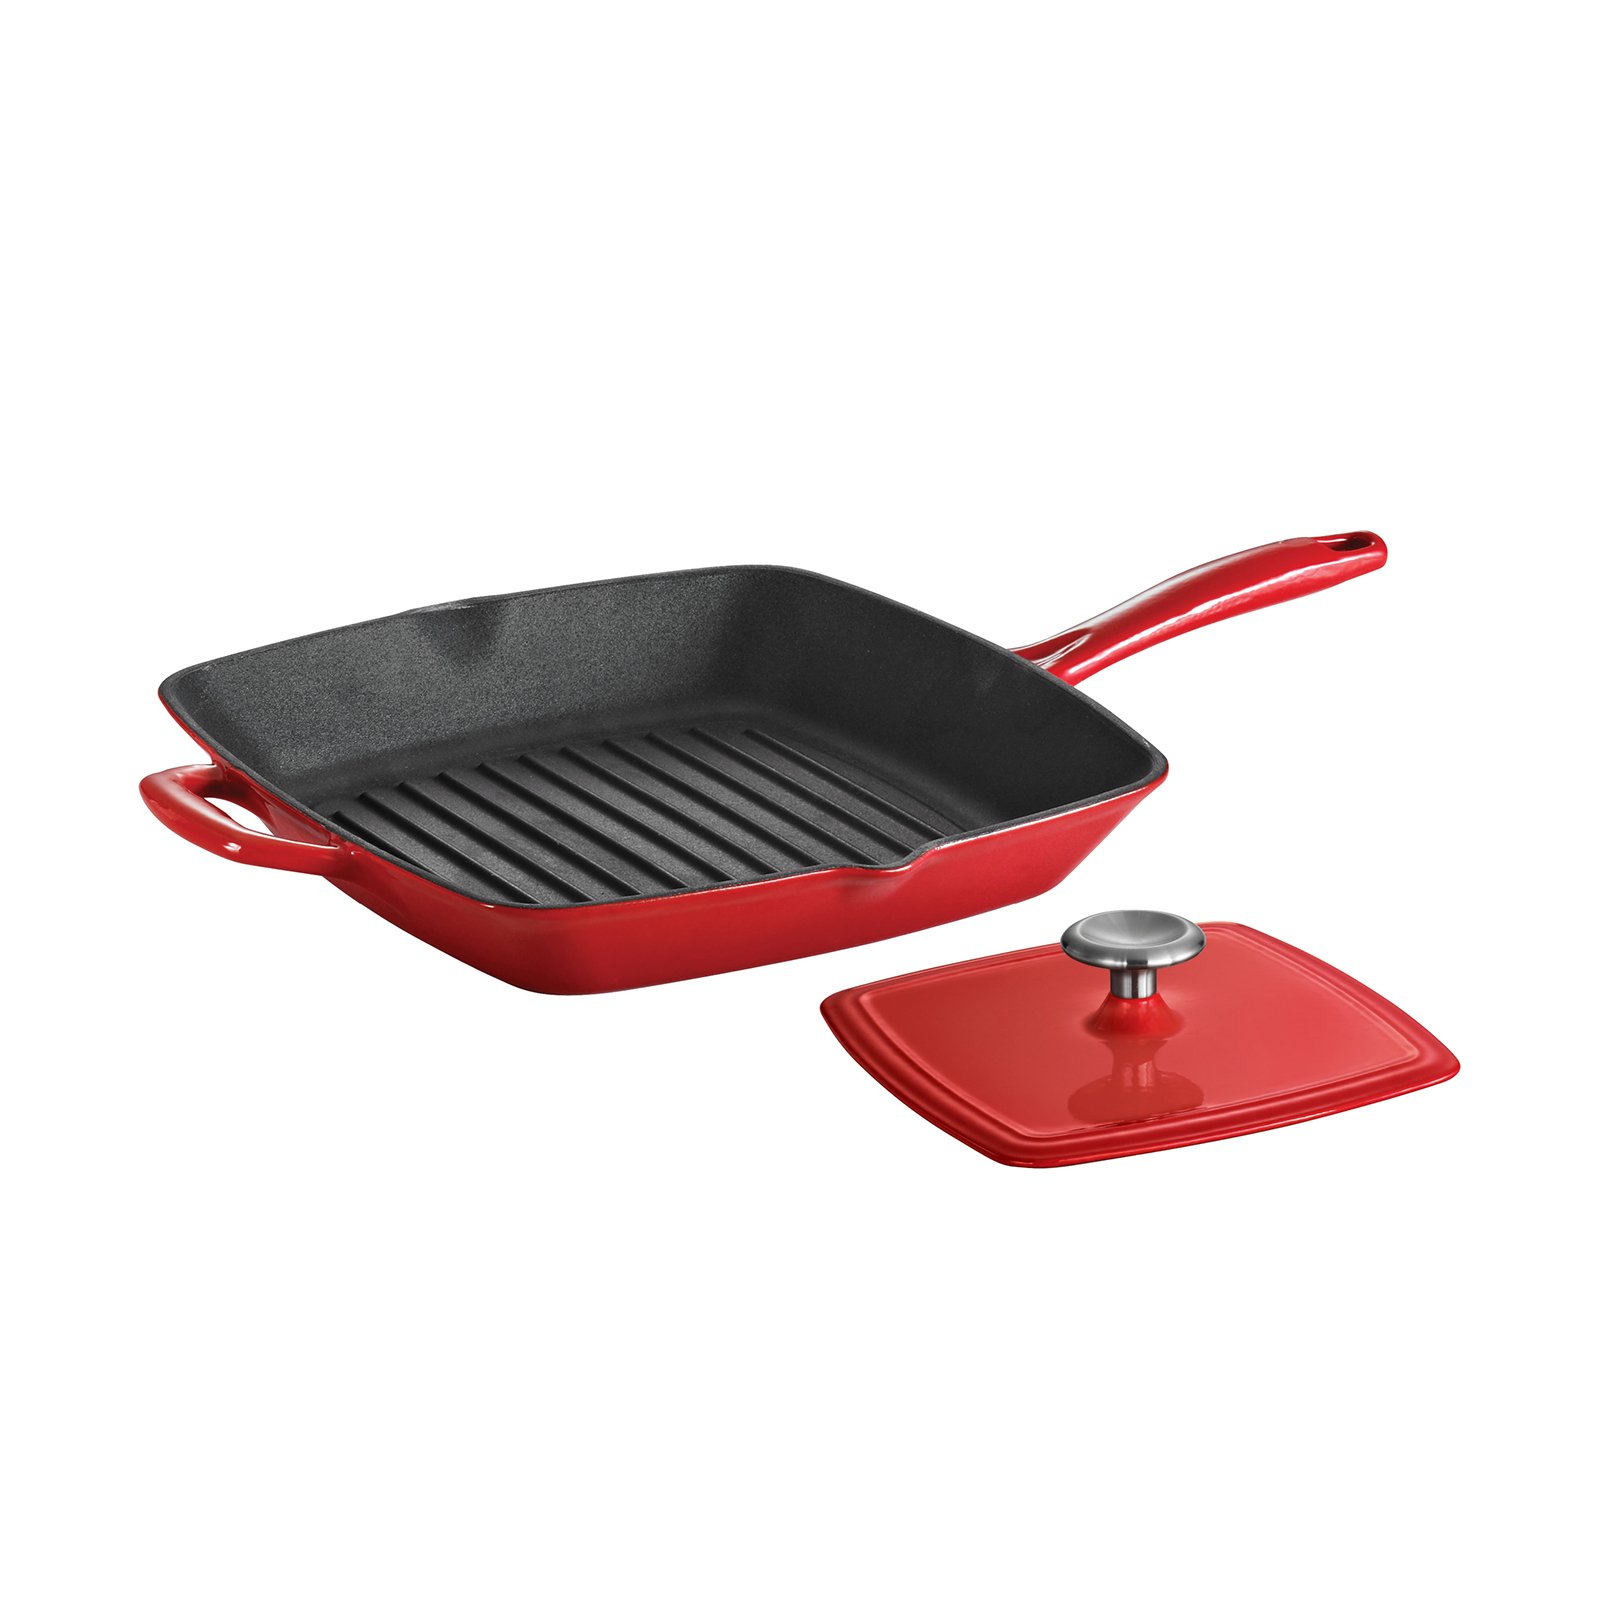 Tramontina Gourmet Enameled Cast Iron 11-inch Grill Pan with Press - Gradated Red - image 1 of 2